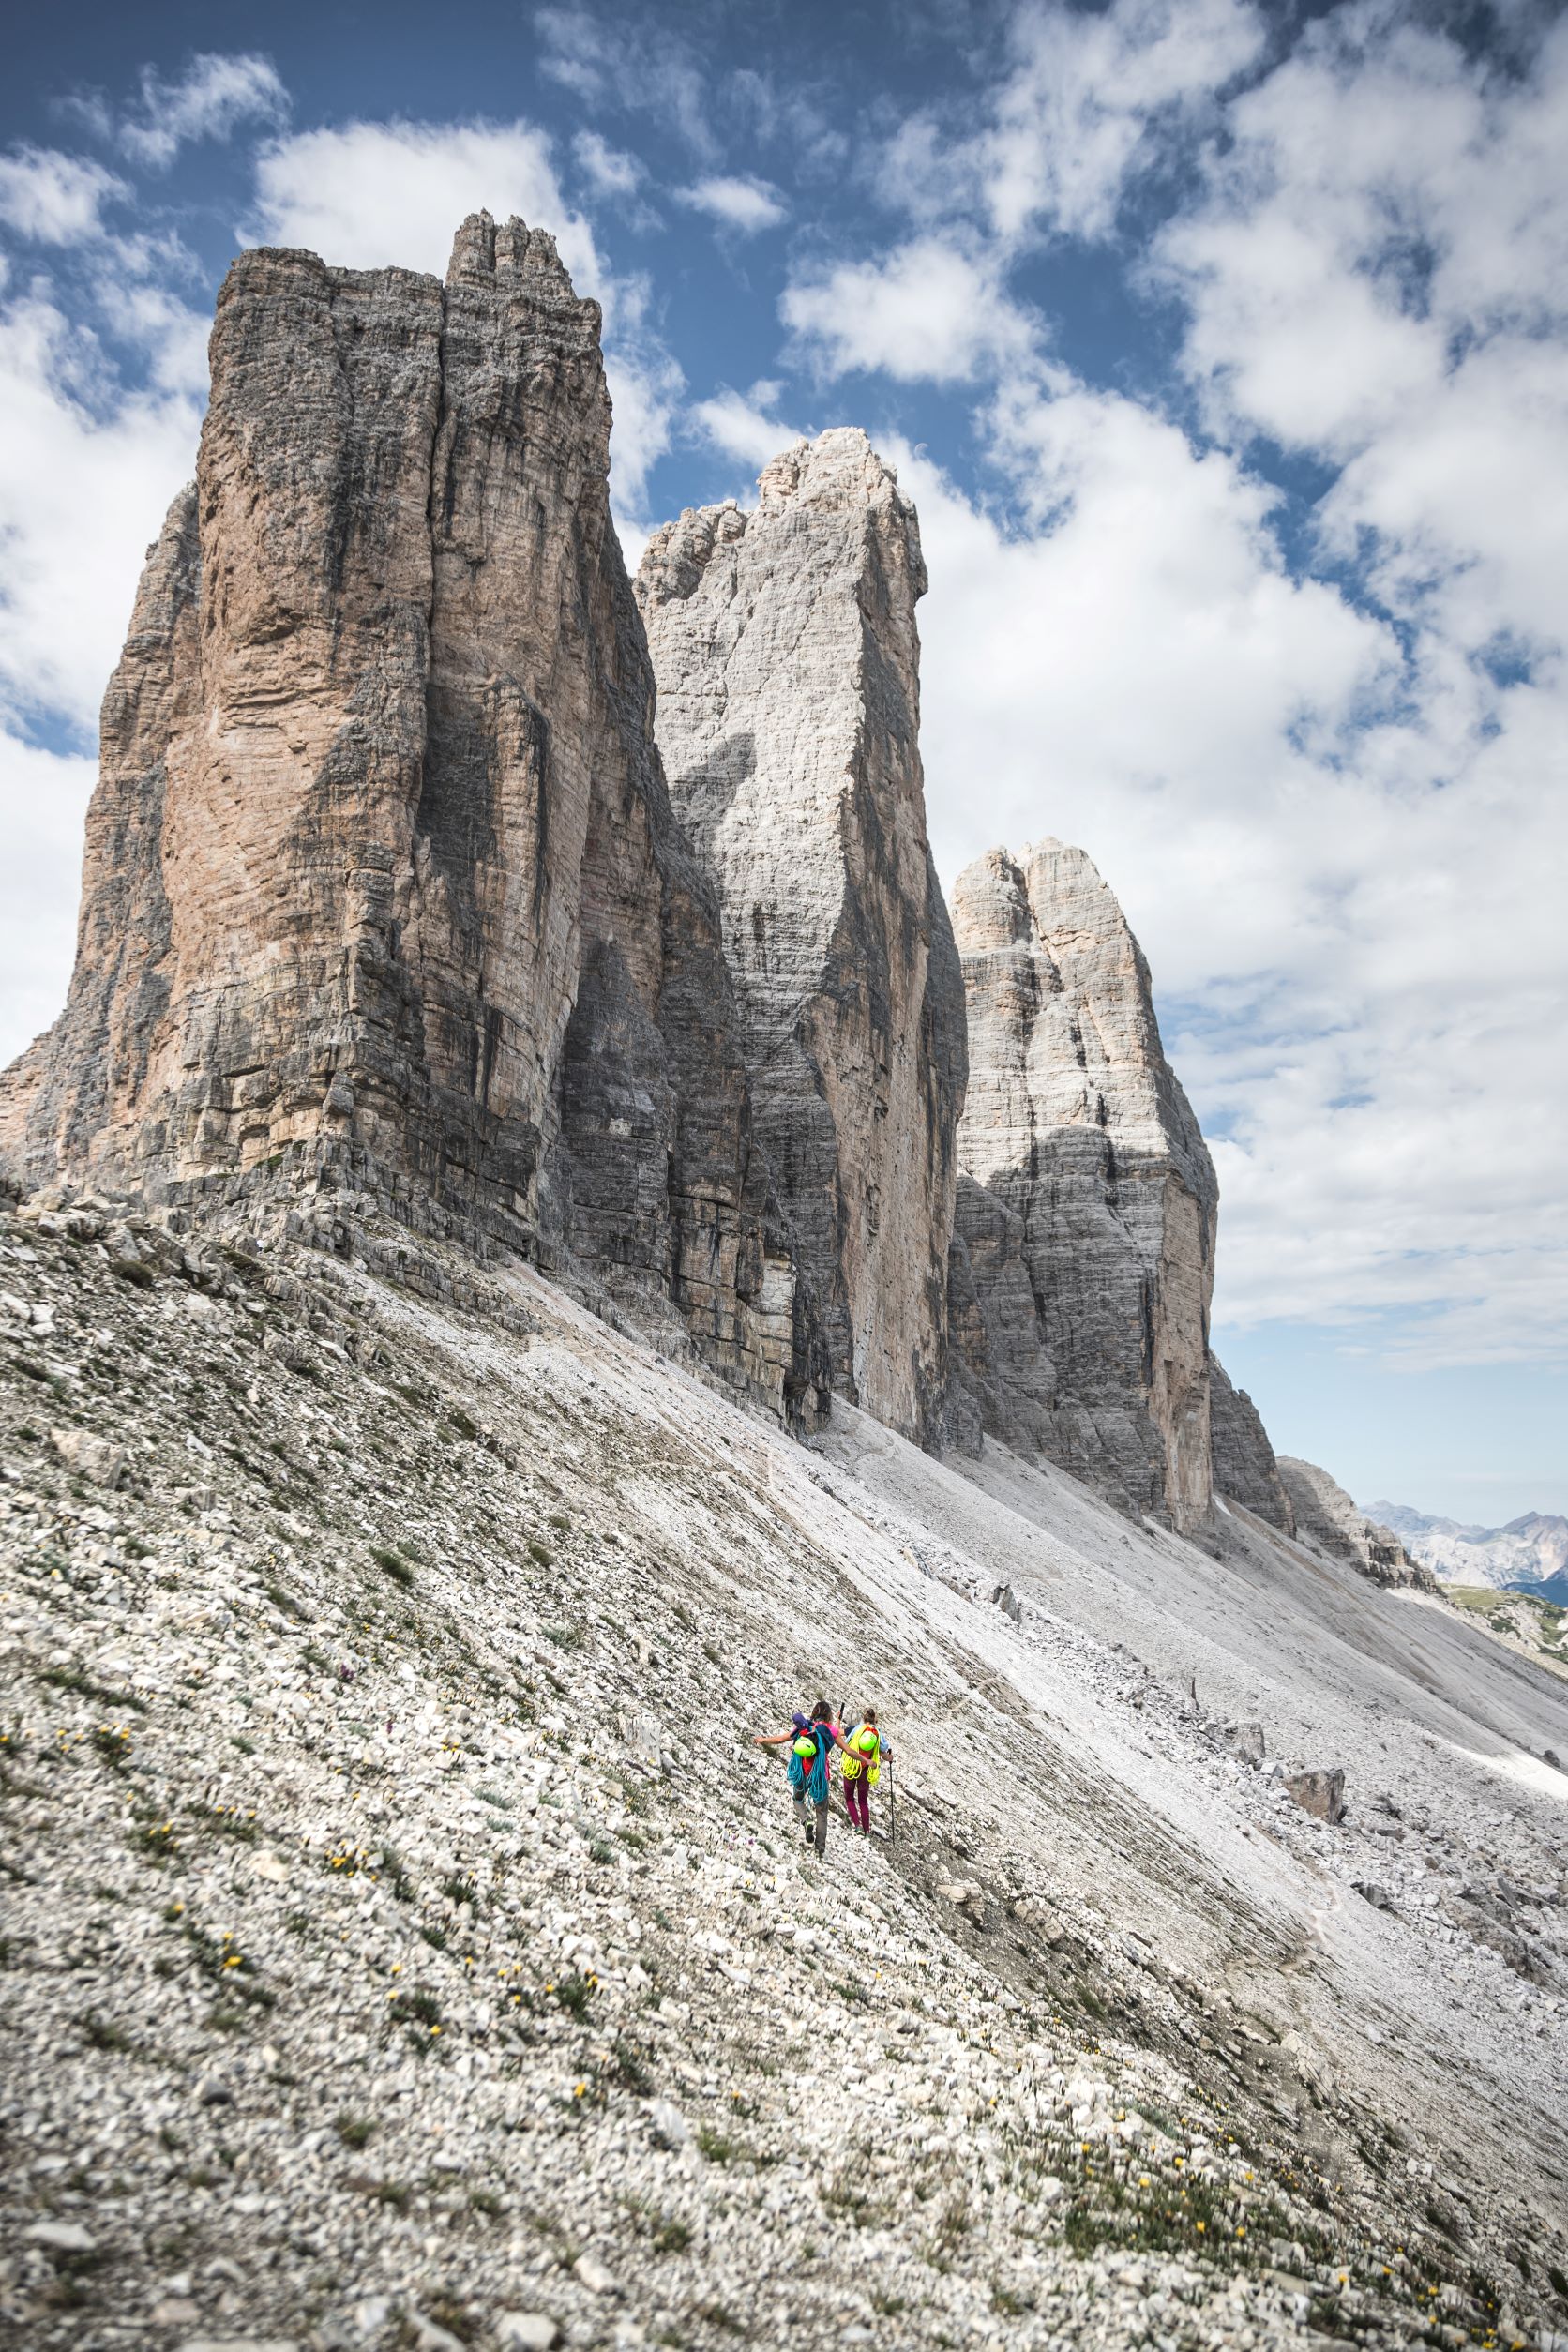 Eline Le menestrel approaching a route in the Dolomites